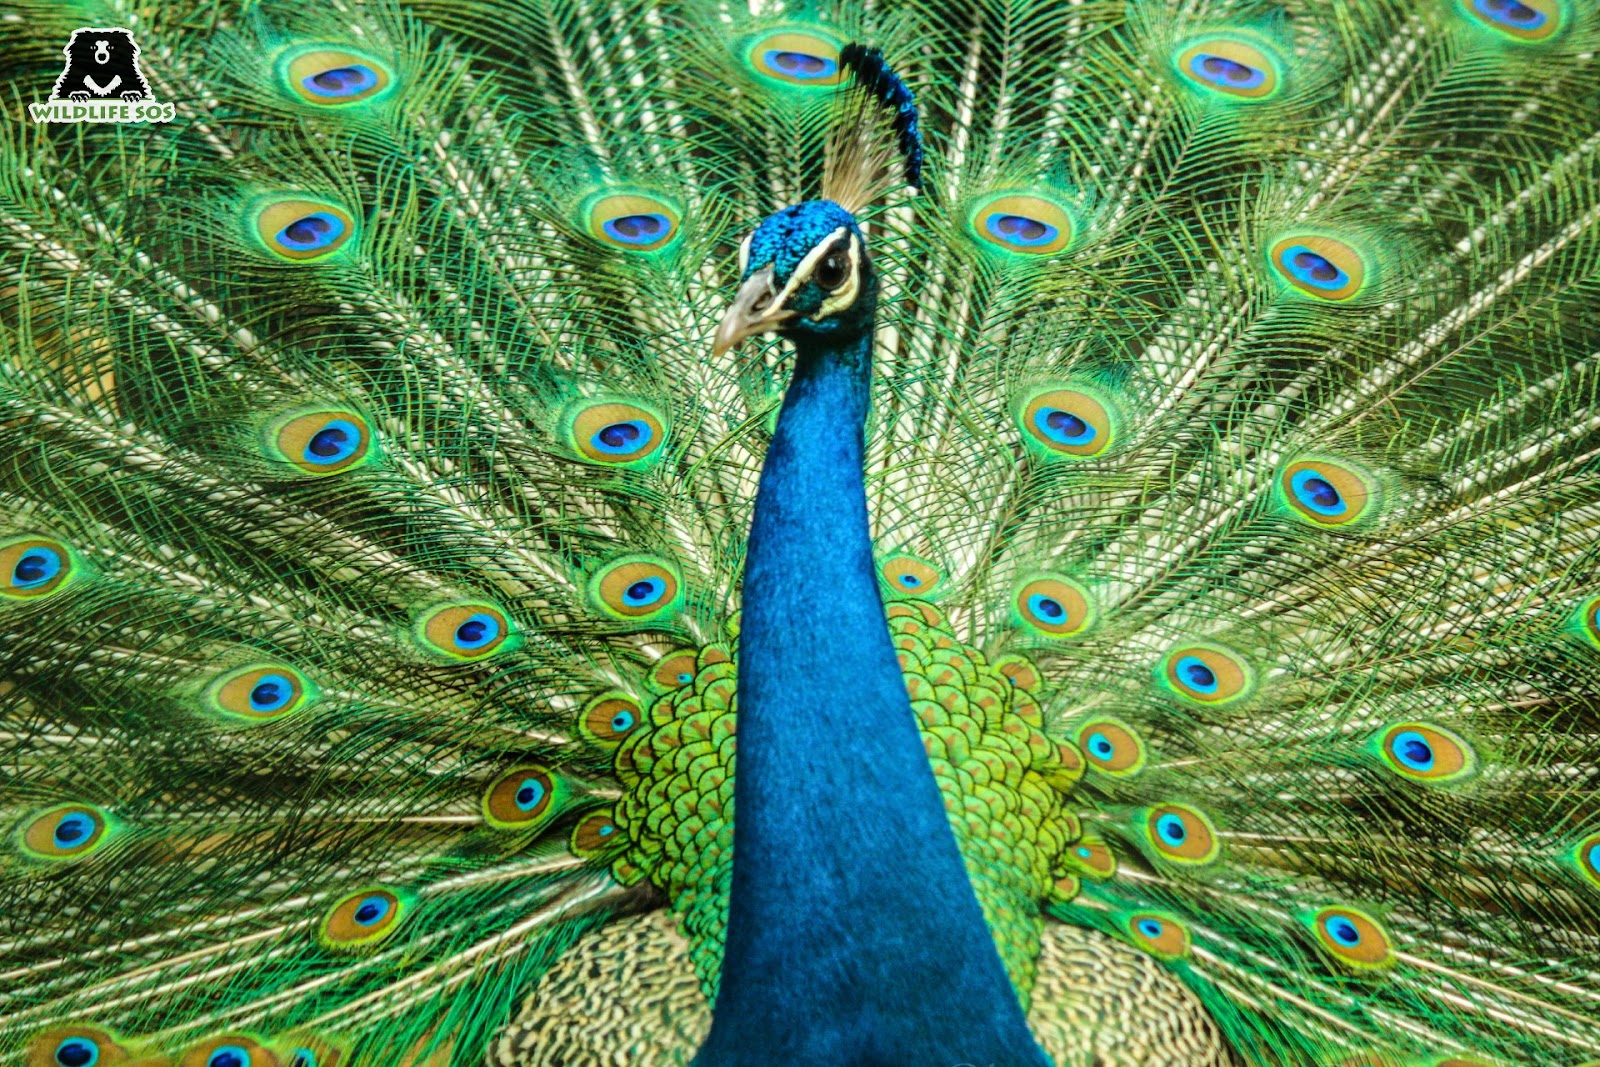 Know All About The Extravagant Peafowl! - Wildlife SOS